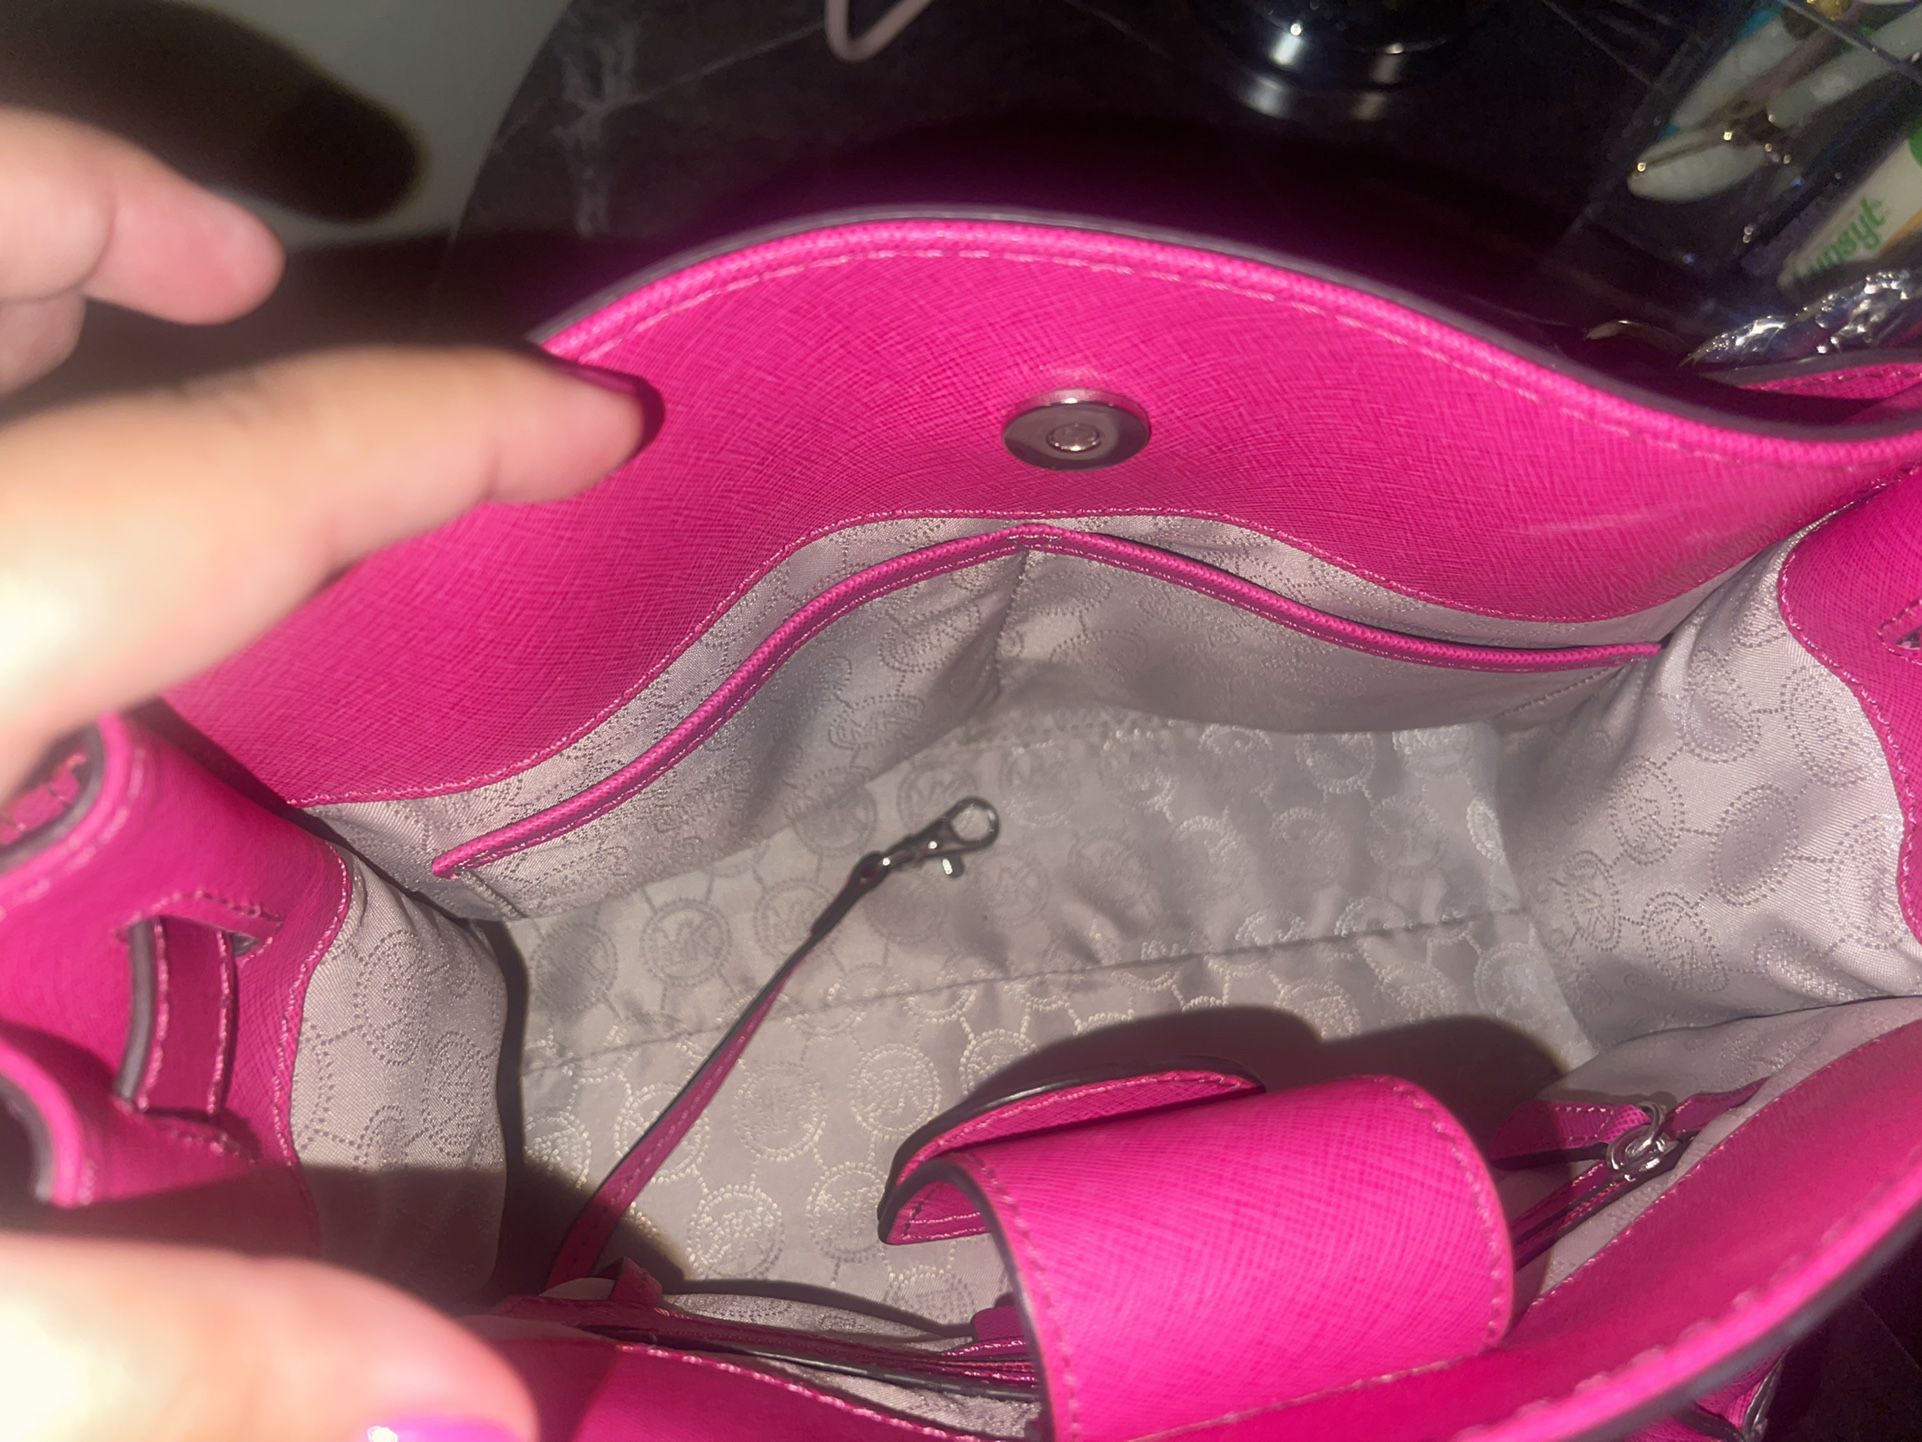 Fuschia Pink Michael Kors Handbag/Purse for Sale in The Colony, TX - OfferUp